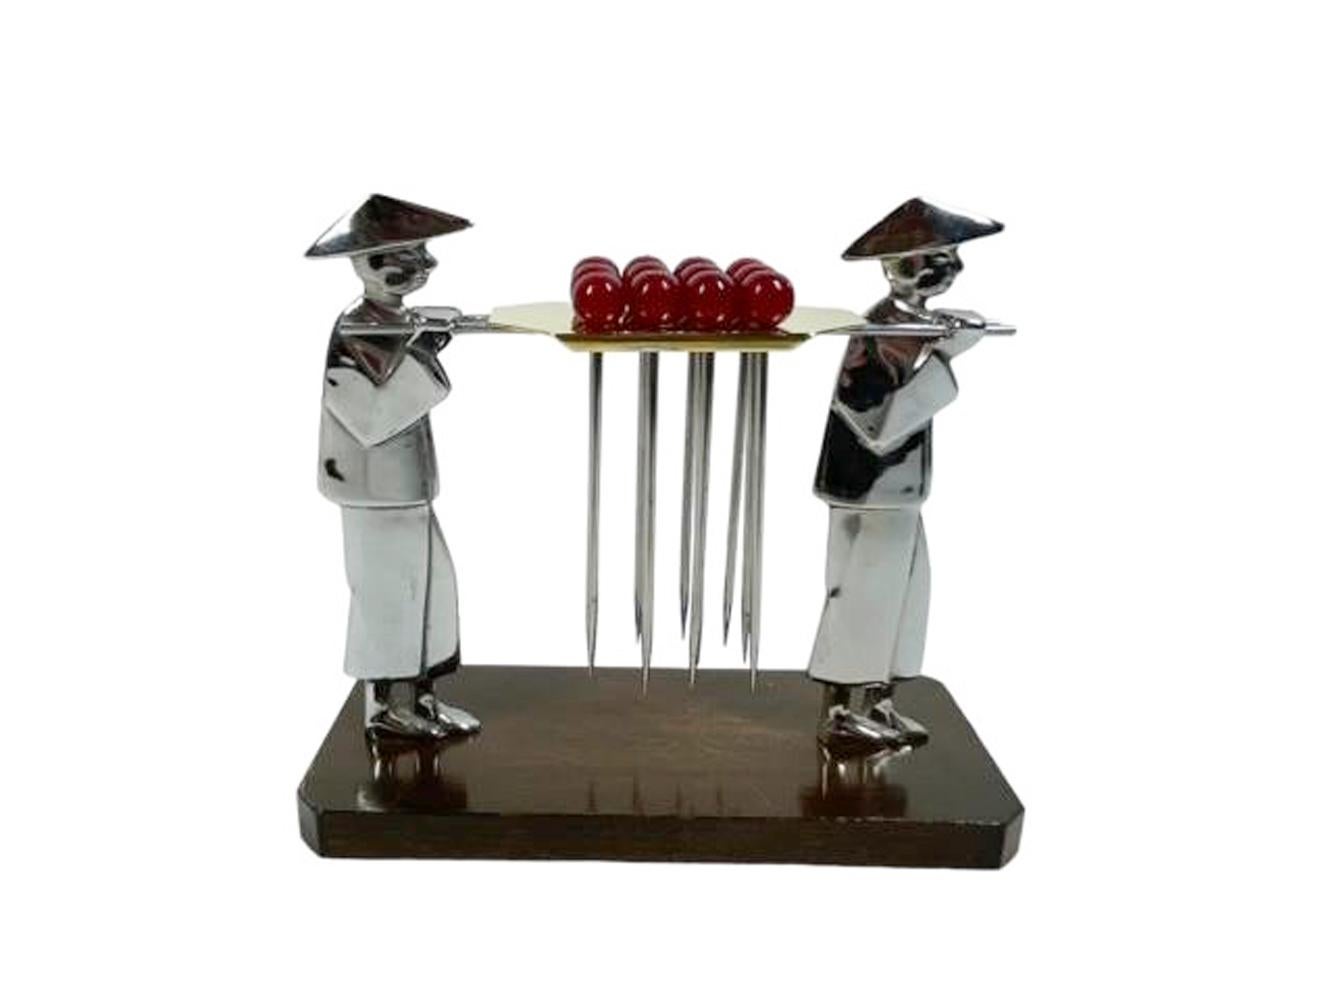 Set of 12 Art Deco Red Ball Top Cocktail Picks in a Chrome and Gold-Tone Holder In Good Condition For Sale In Chapel Hill, NC